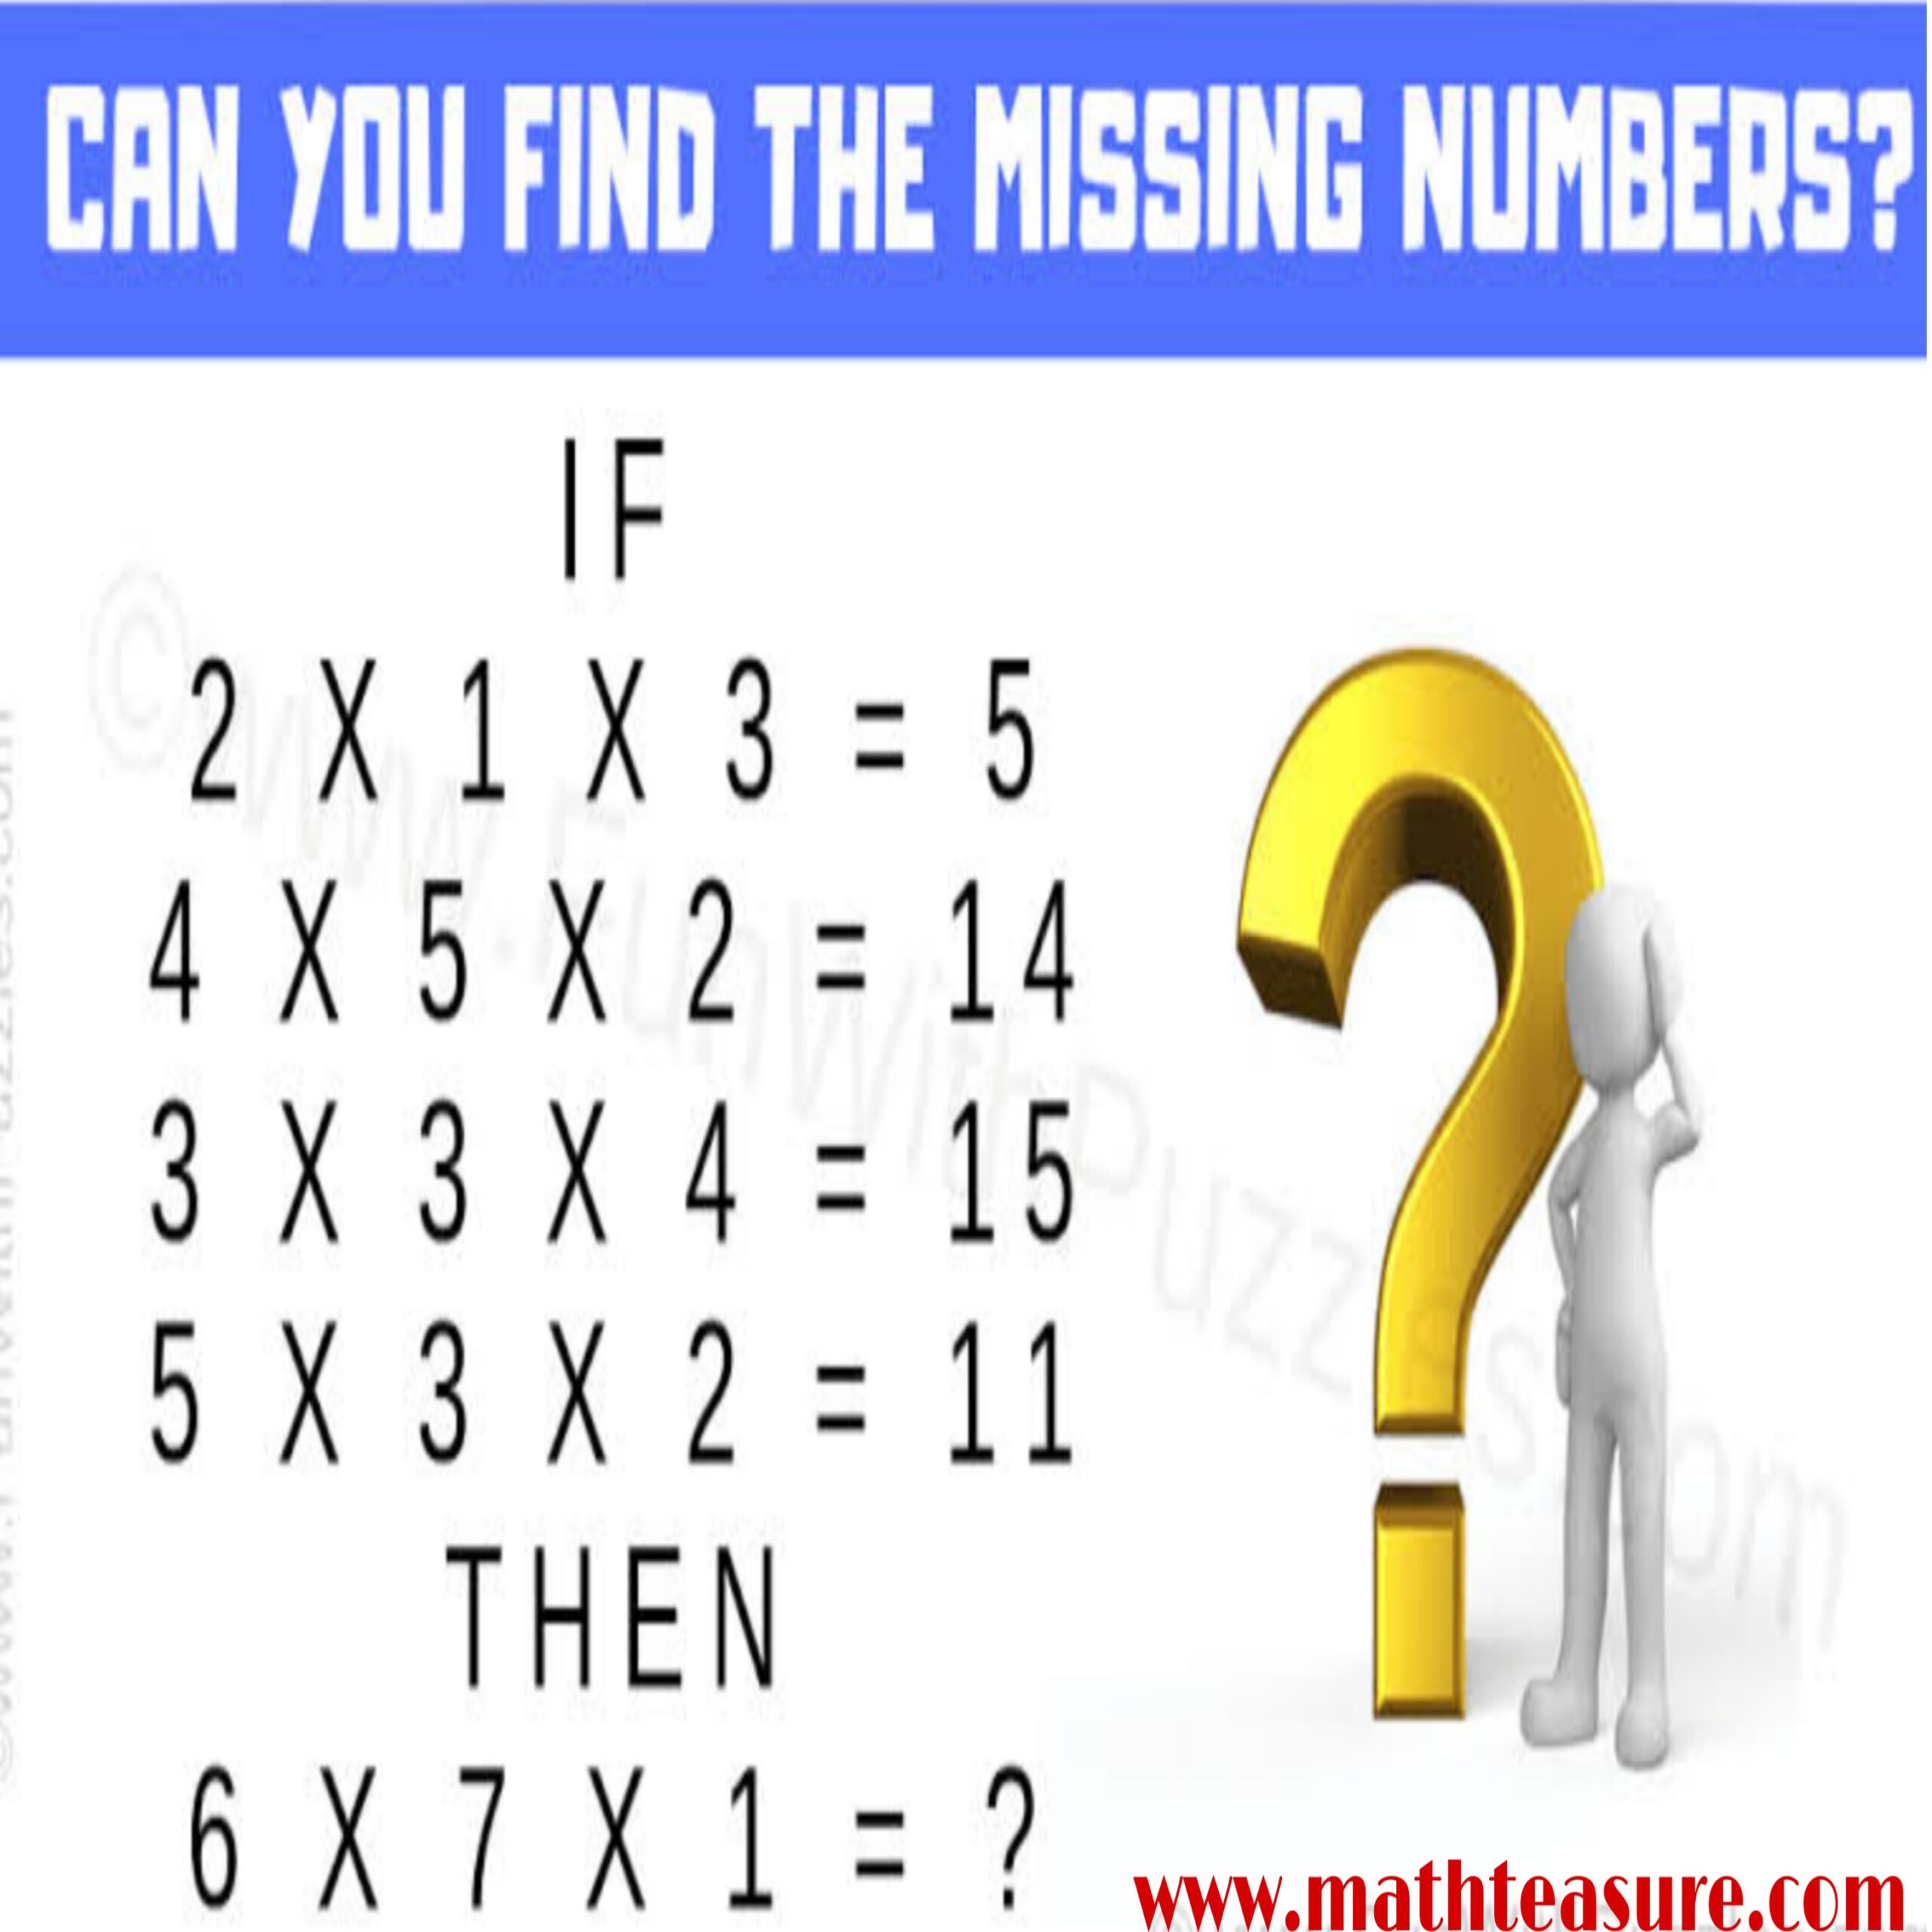 Find the missing number 2 x 1 x 3 = 5